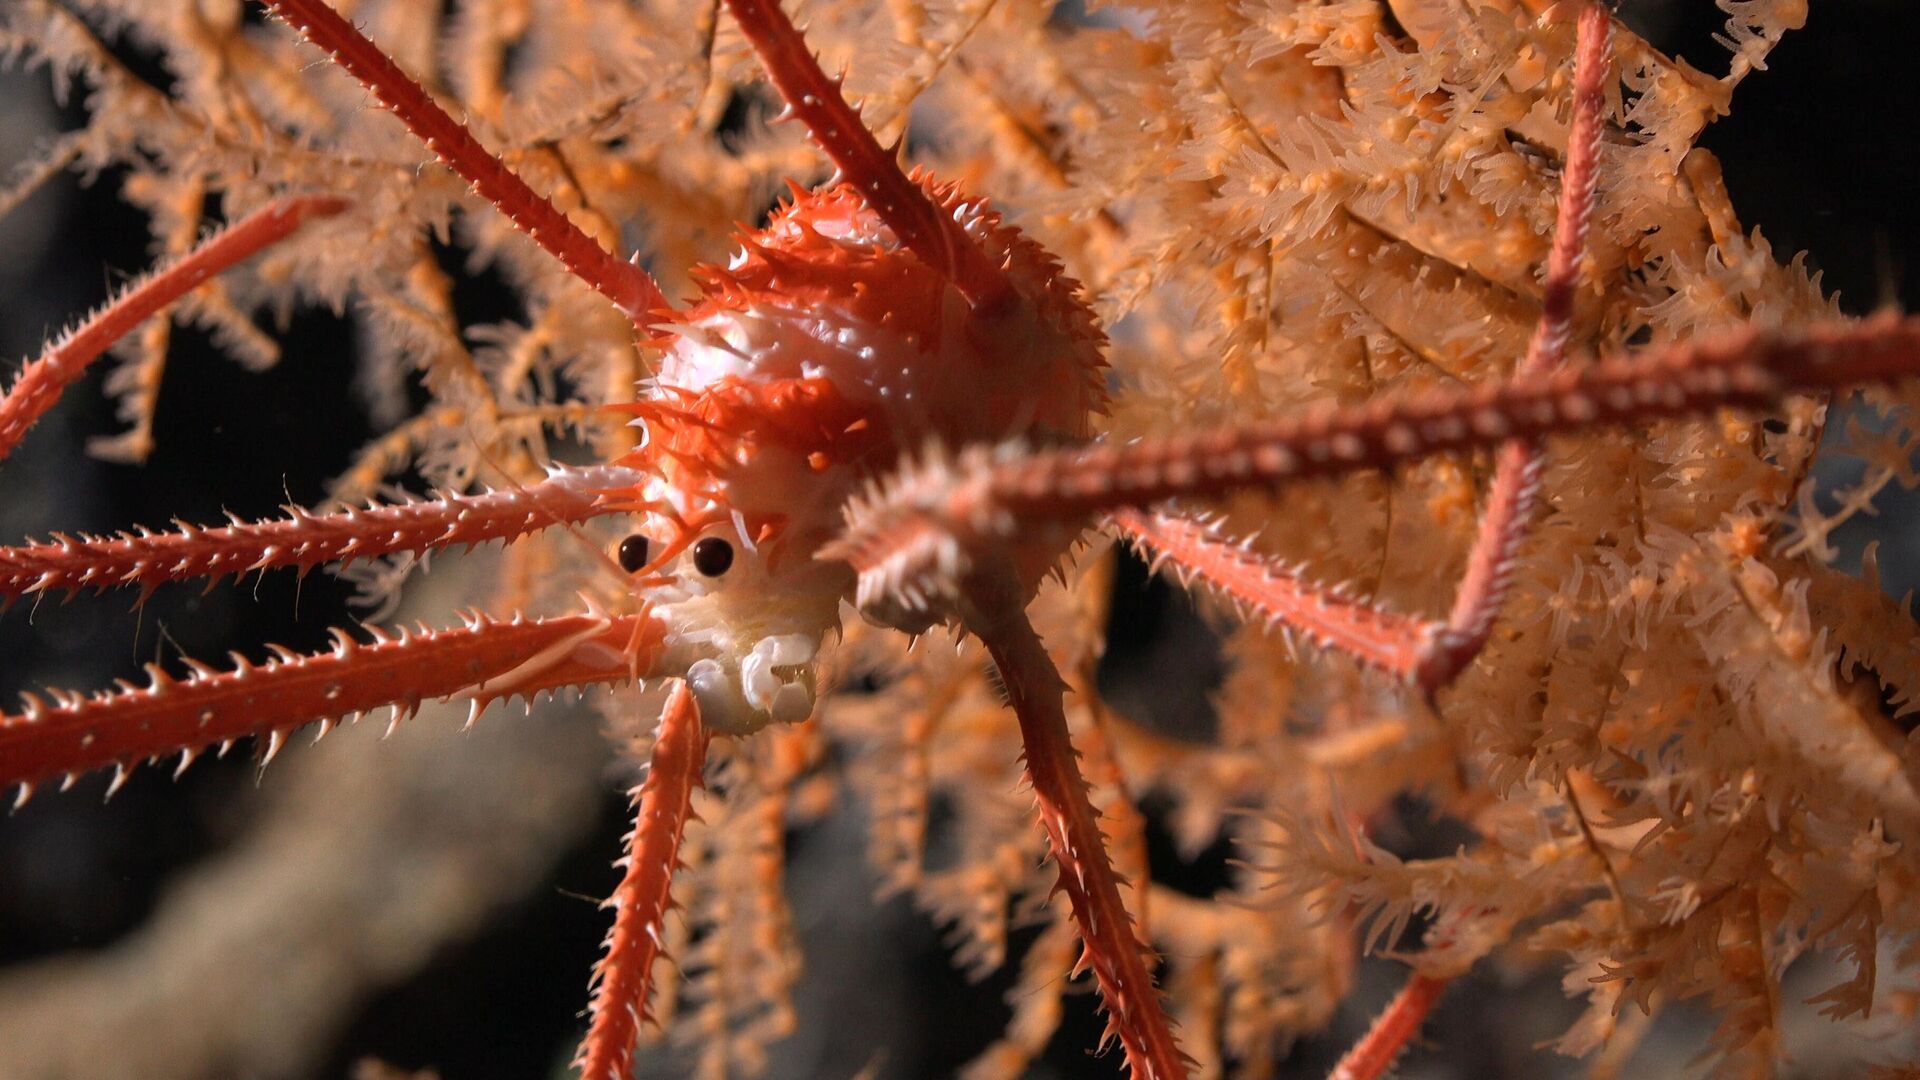 A squat lobster documented in coral at a depth of 669 meters on Seamount JF2. An international group of scientists aboard a recent Schmidt Ocean Institute expedition believe they have discovered more than 100 new species living on seamounts off the coast of Chile, including deep-sea corals, glass sponges, sea urchins, amphipods, and squat lobsters. - Sputnik International, 1920, 25.02.2024